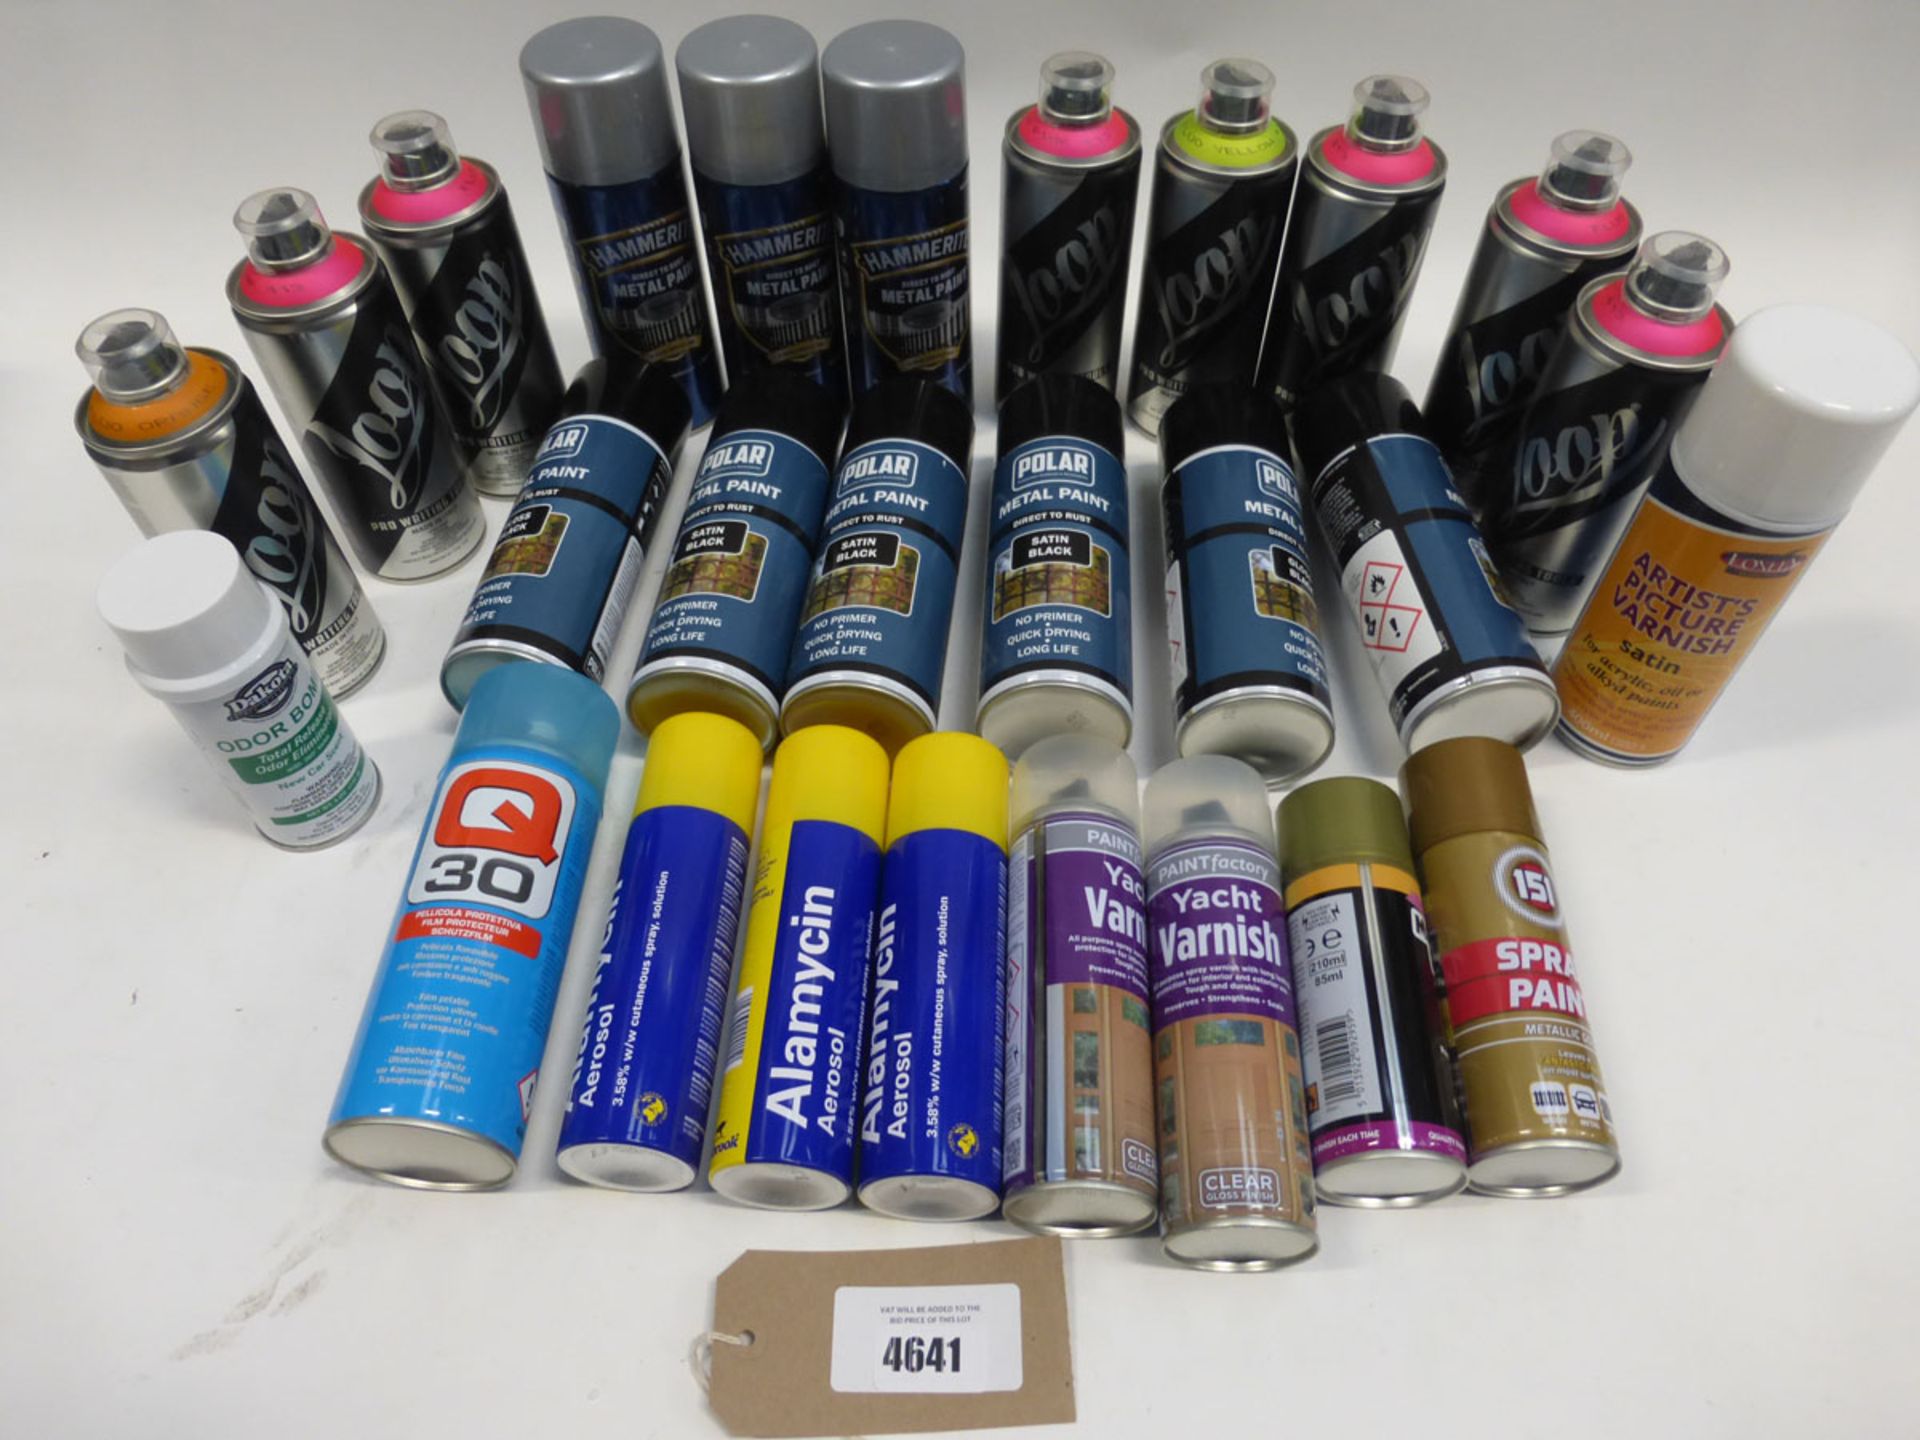 Bag containing various spray paints, to include: satin black, yacht varnish, pro-writing fluorescent